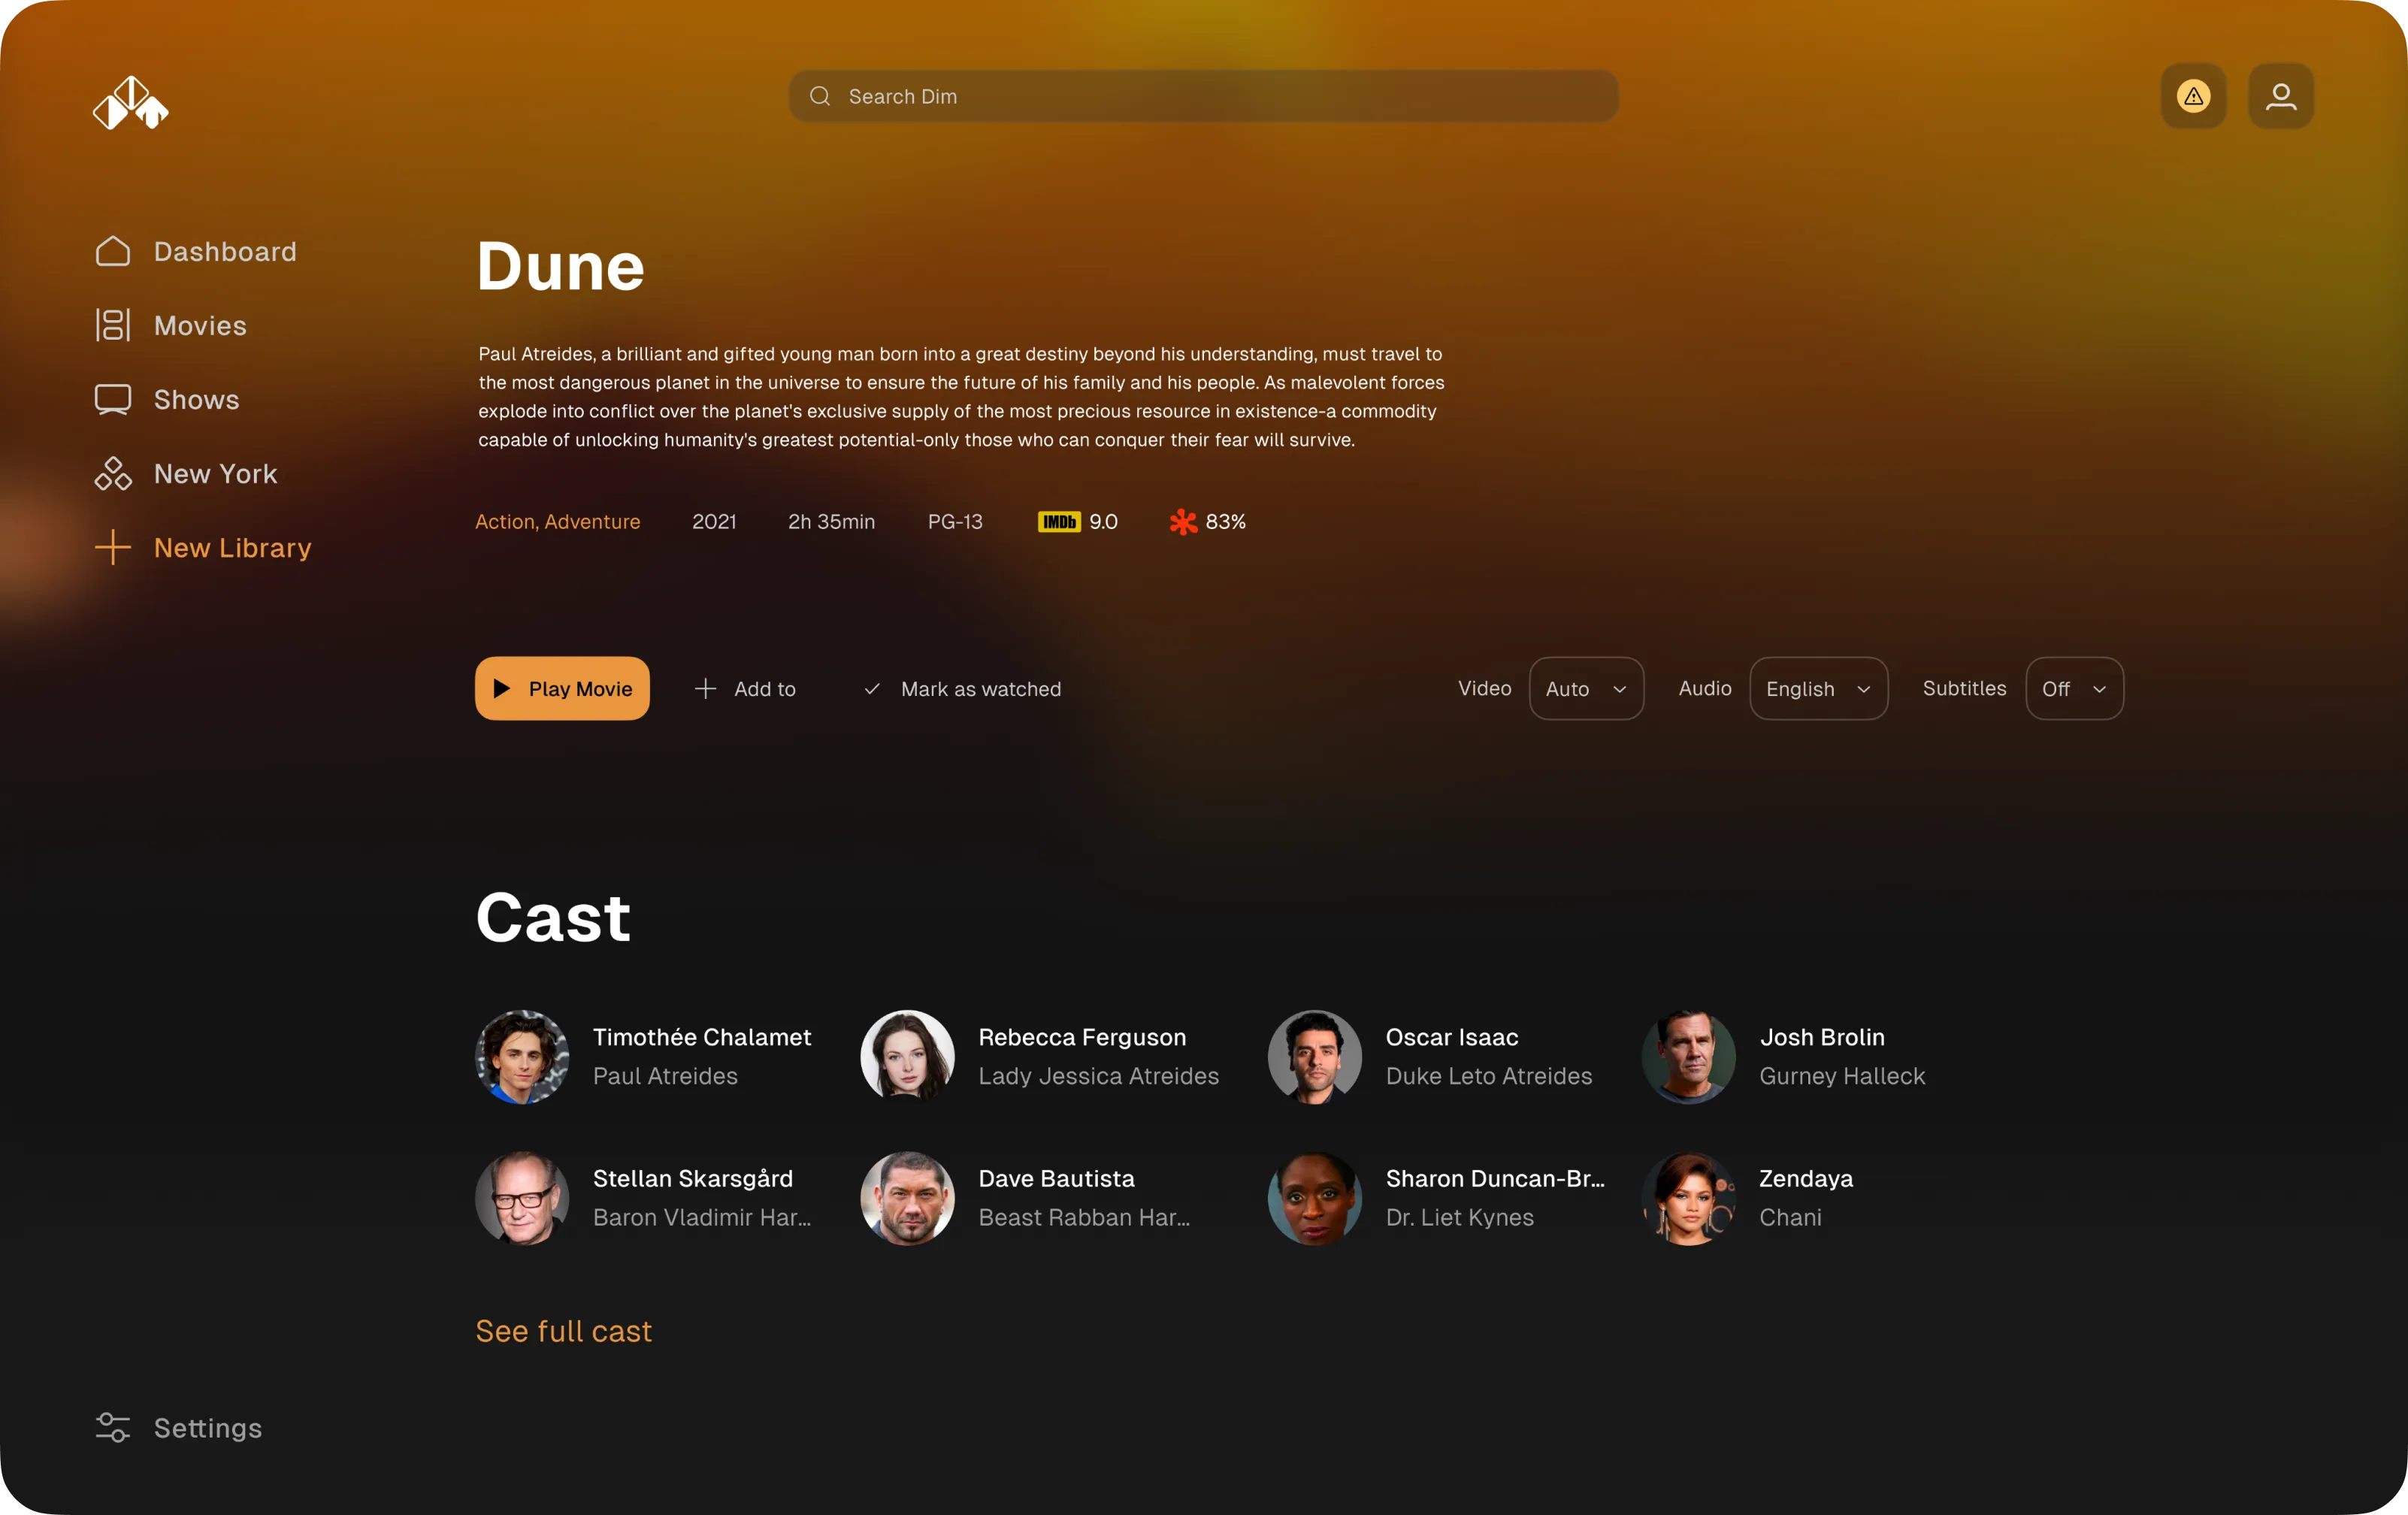 UI of a screen for the movie Dune on a streaming platform 